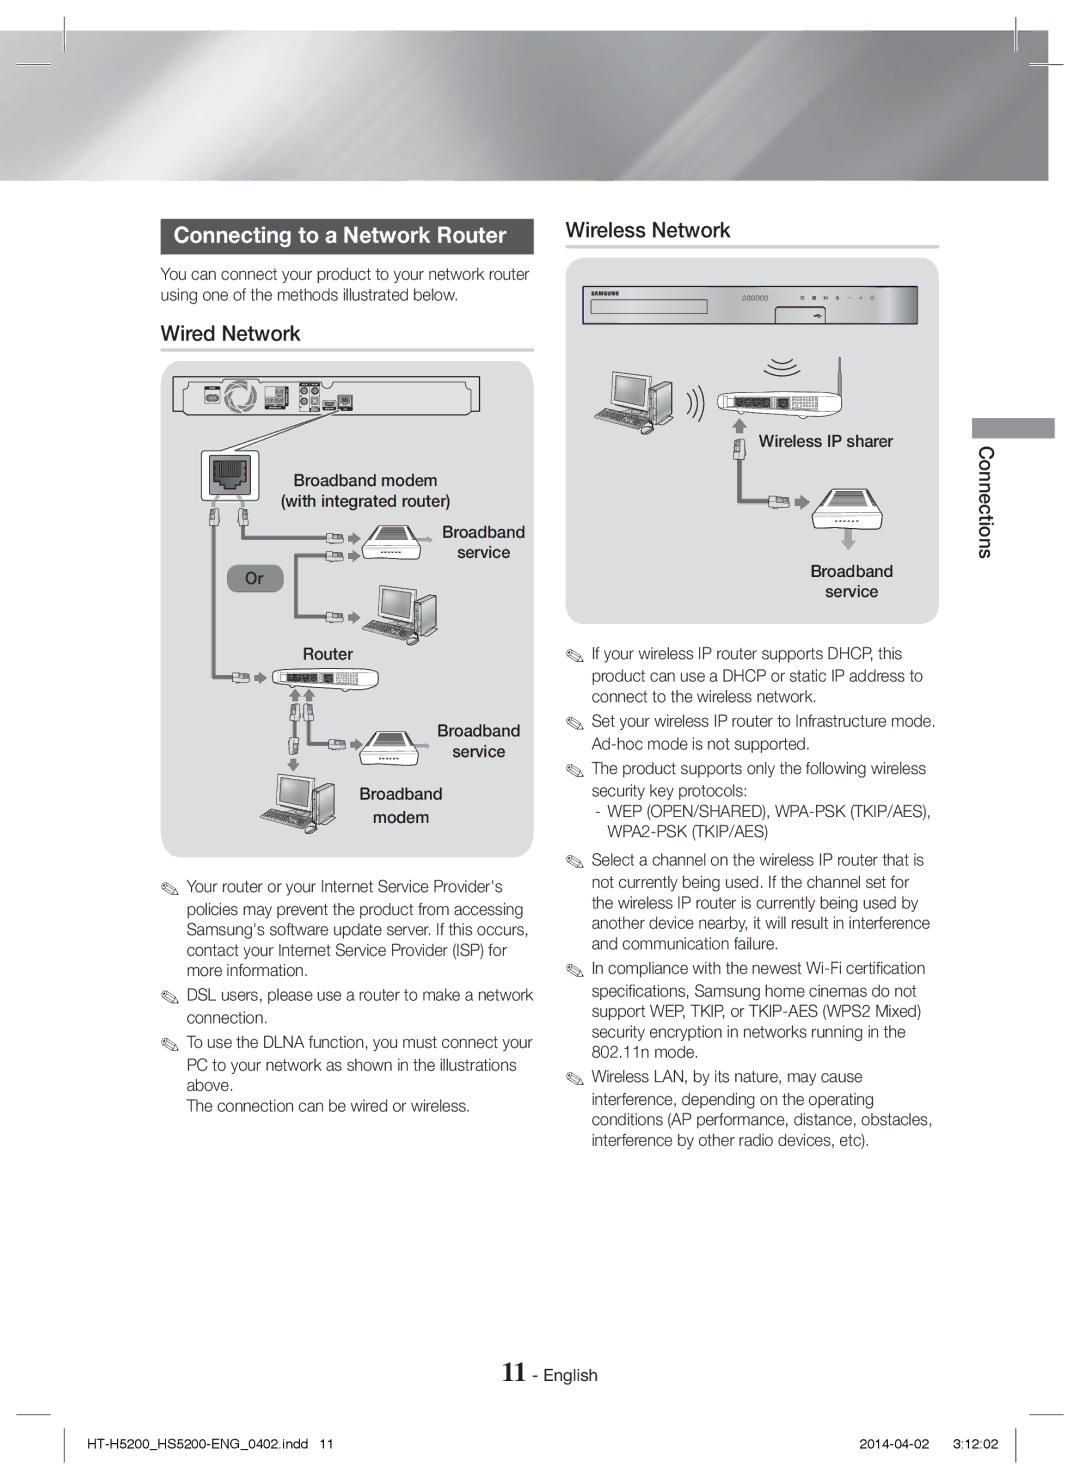 Samsung HT-H5200/ZF, HT-HS5200/EN, HT-H5200/EN, HT-HS5200/ZF, HT-H5200/XU manual Connecting to a Network Router, Wired Network 